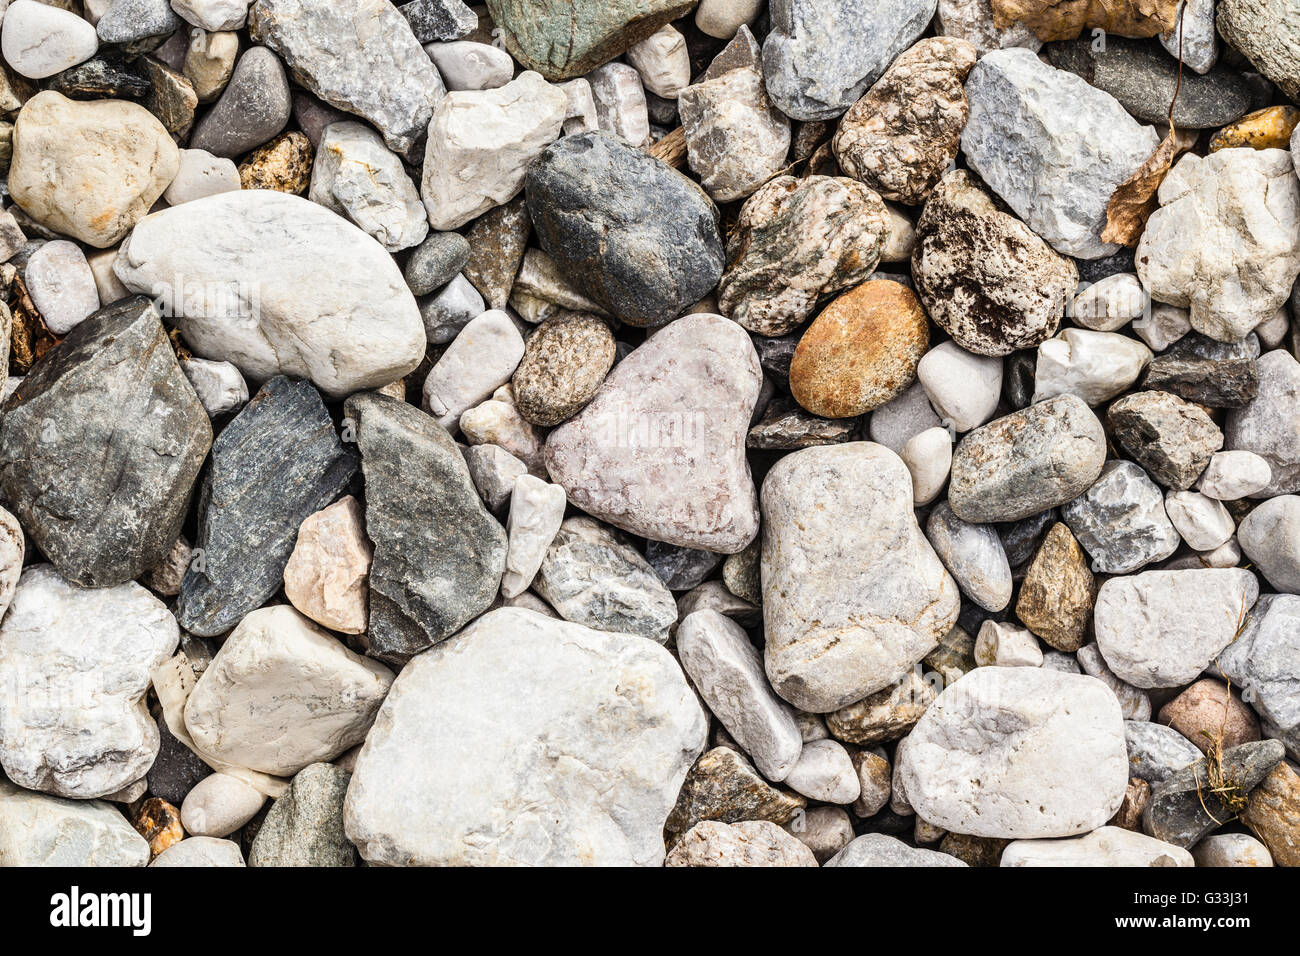 backgroung of rock gravel pebbles of different size and shape Stock Photo